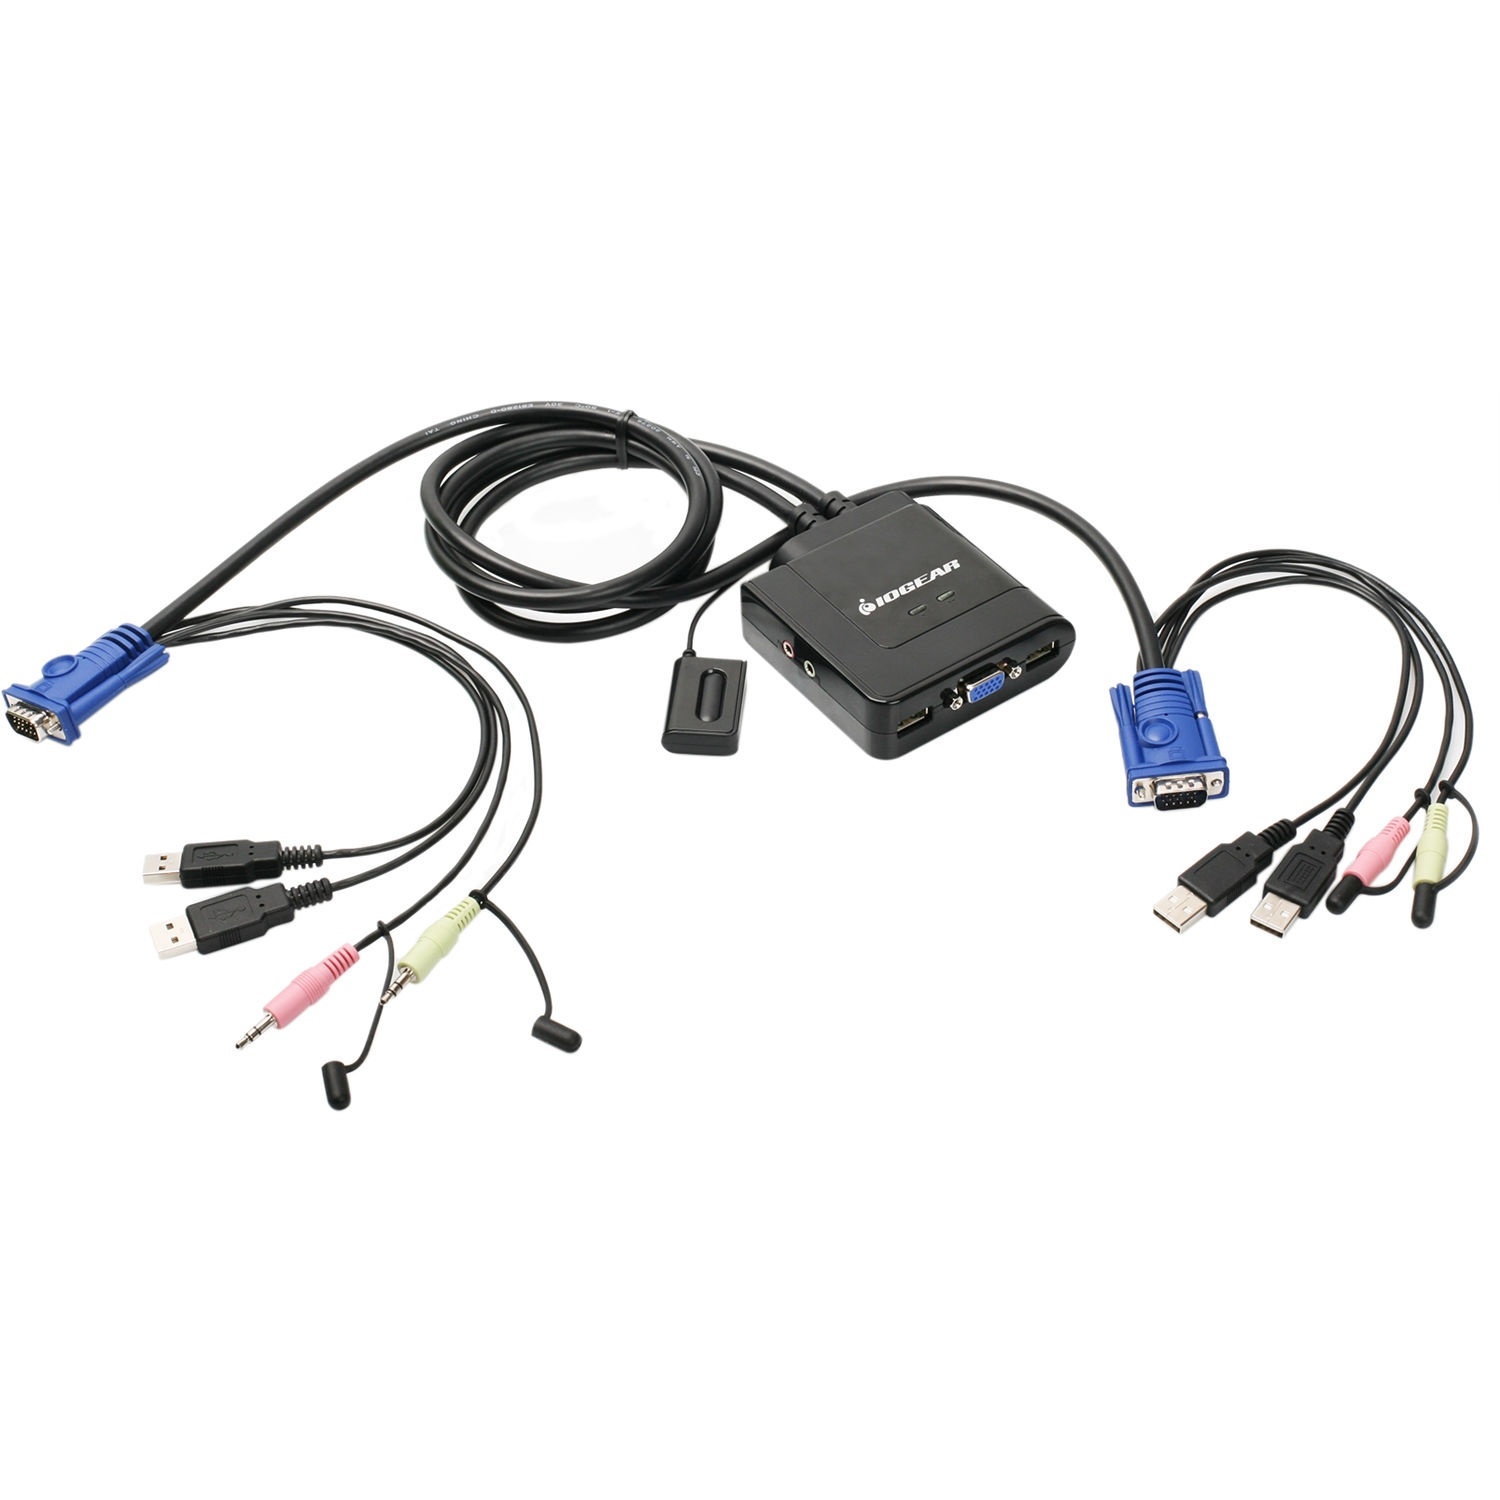 IOGEAR 2-Port USB Cable KVM Switch with Audio and Mic